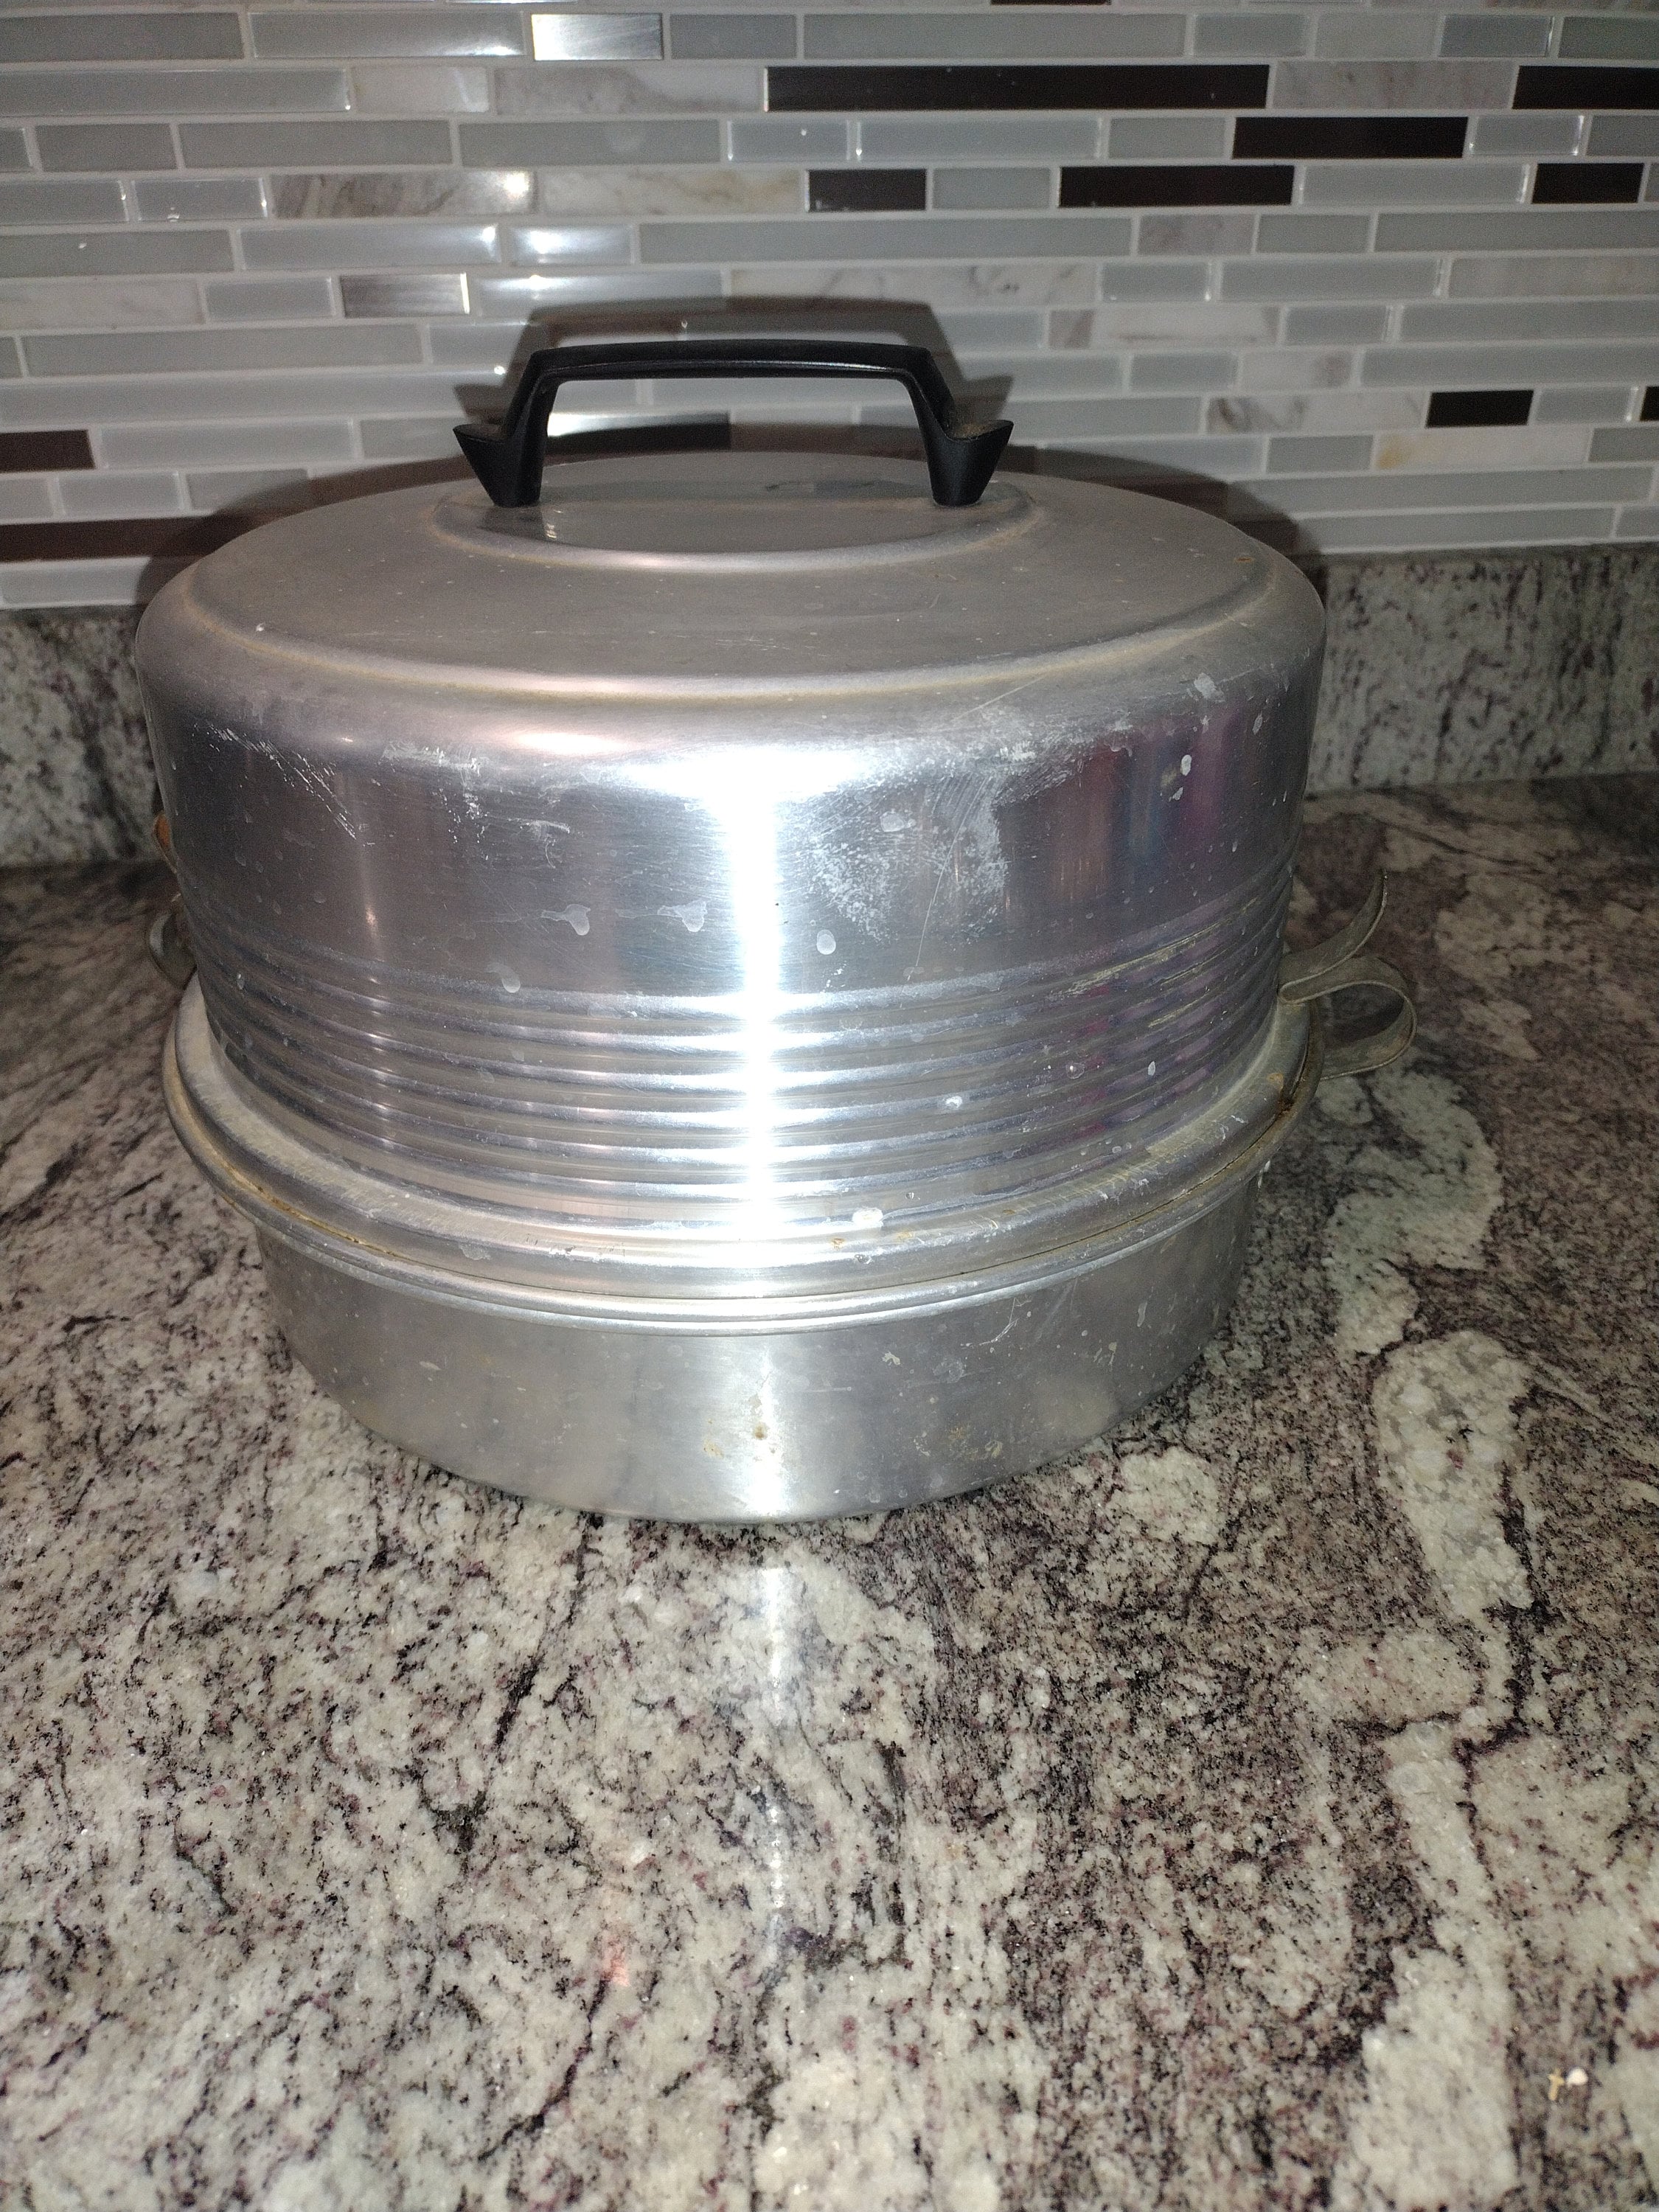 Vintage Aluminum Regal Ware Double-stacked Covered Cake and Pie